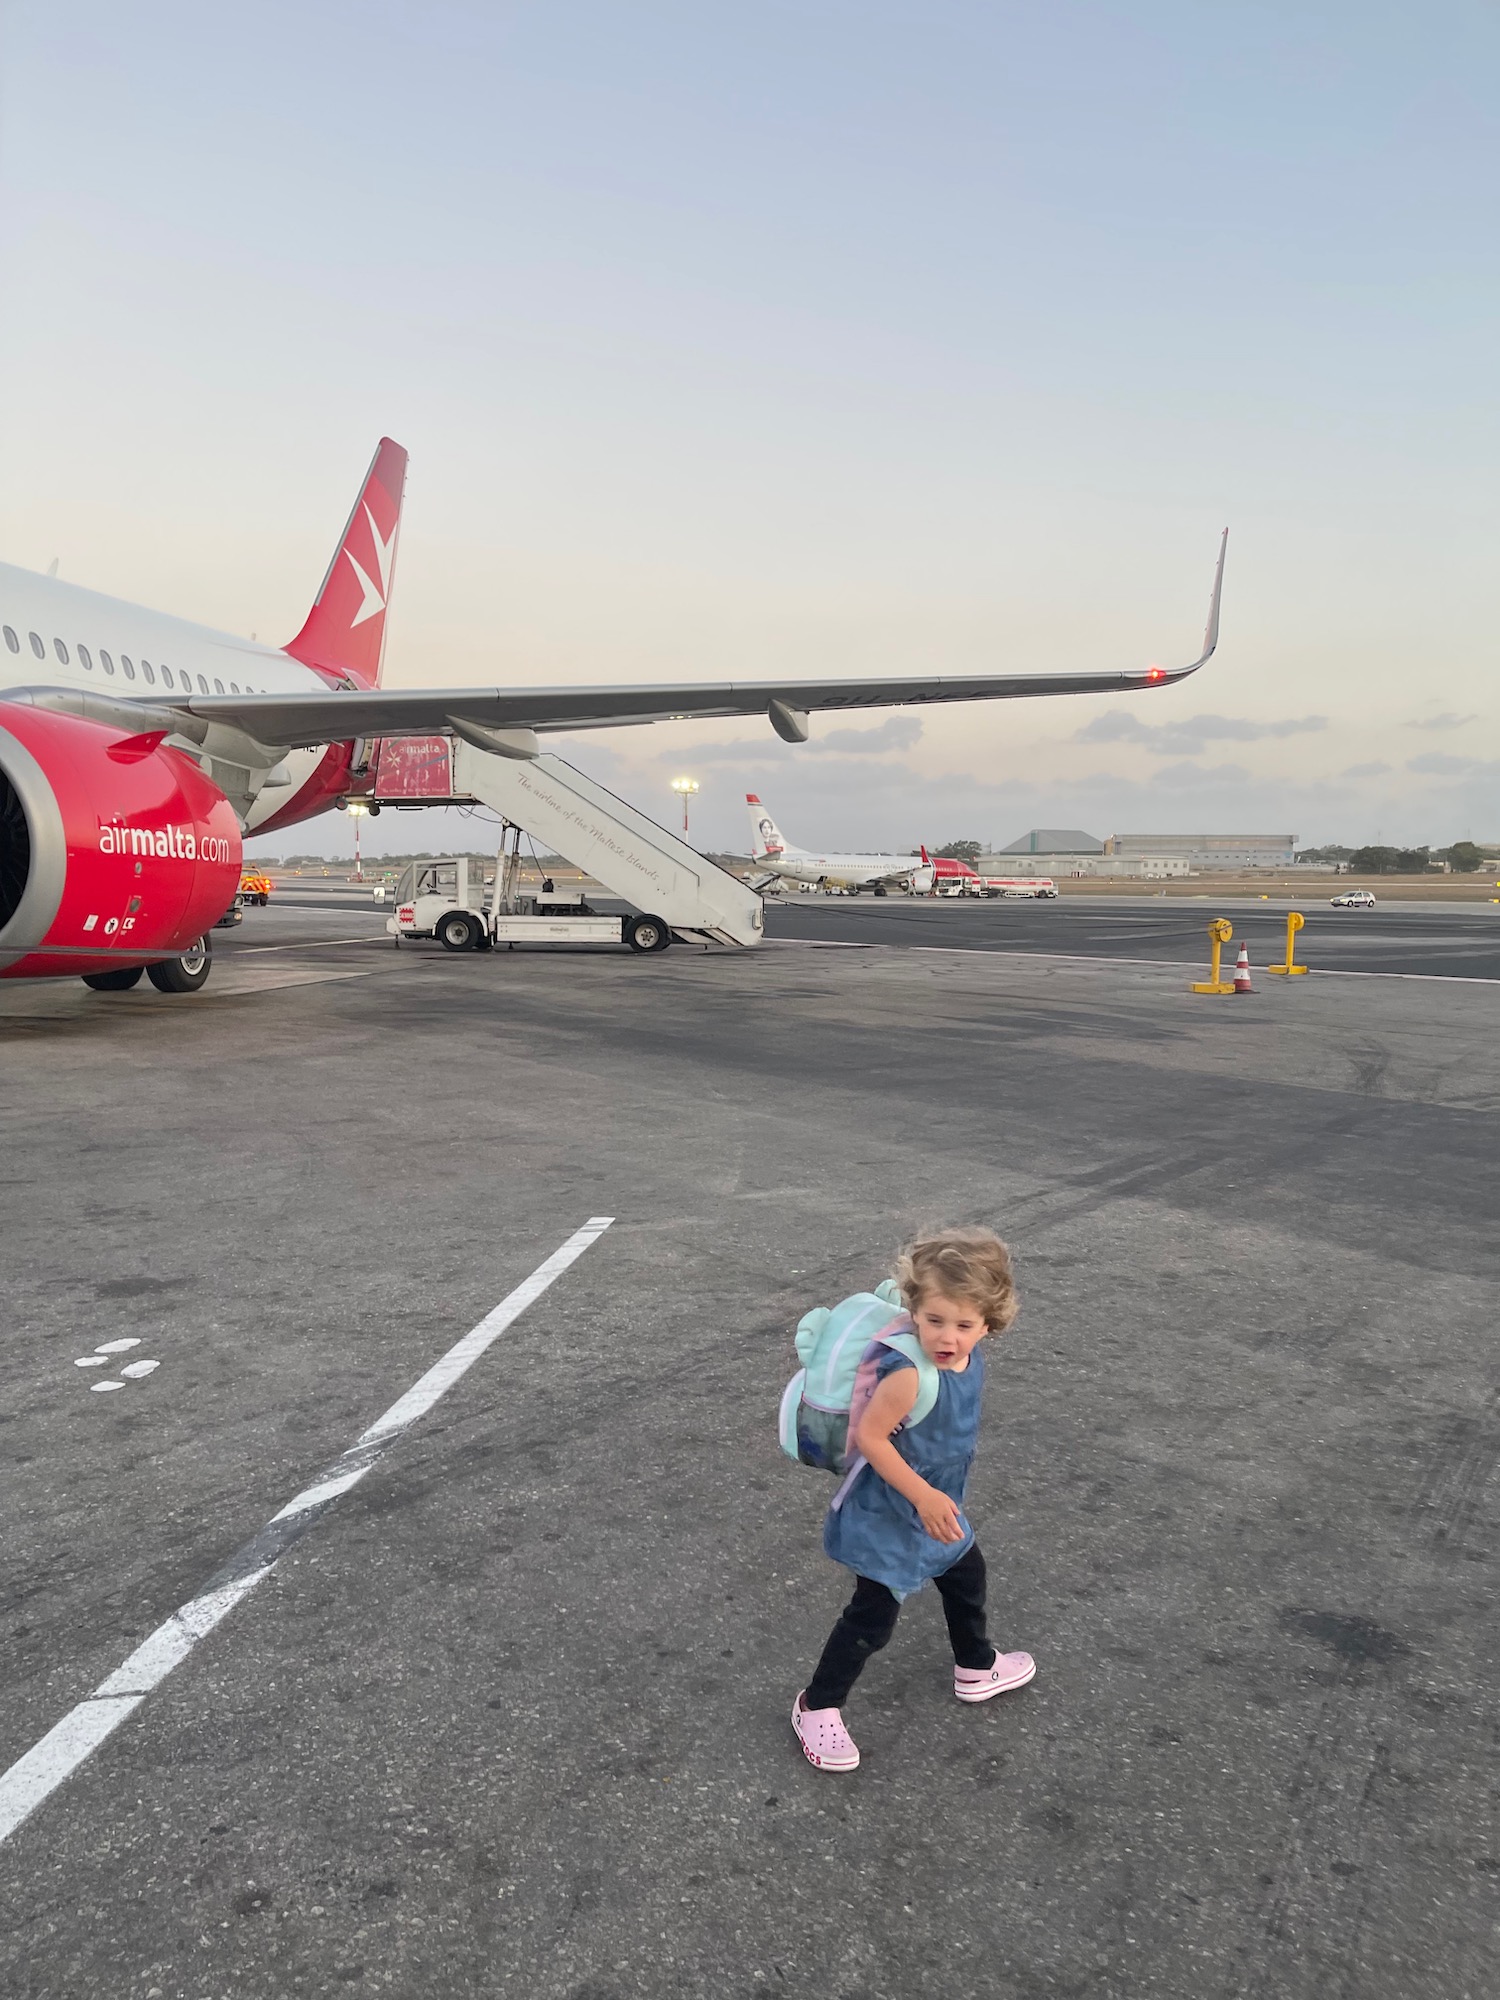 a child walking on a runway